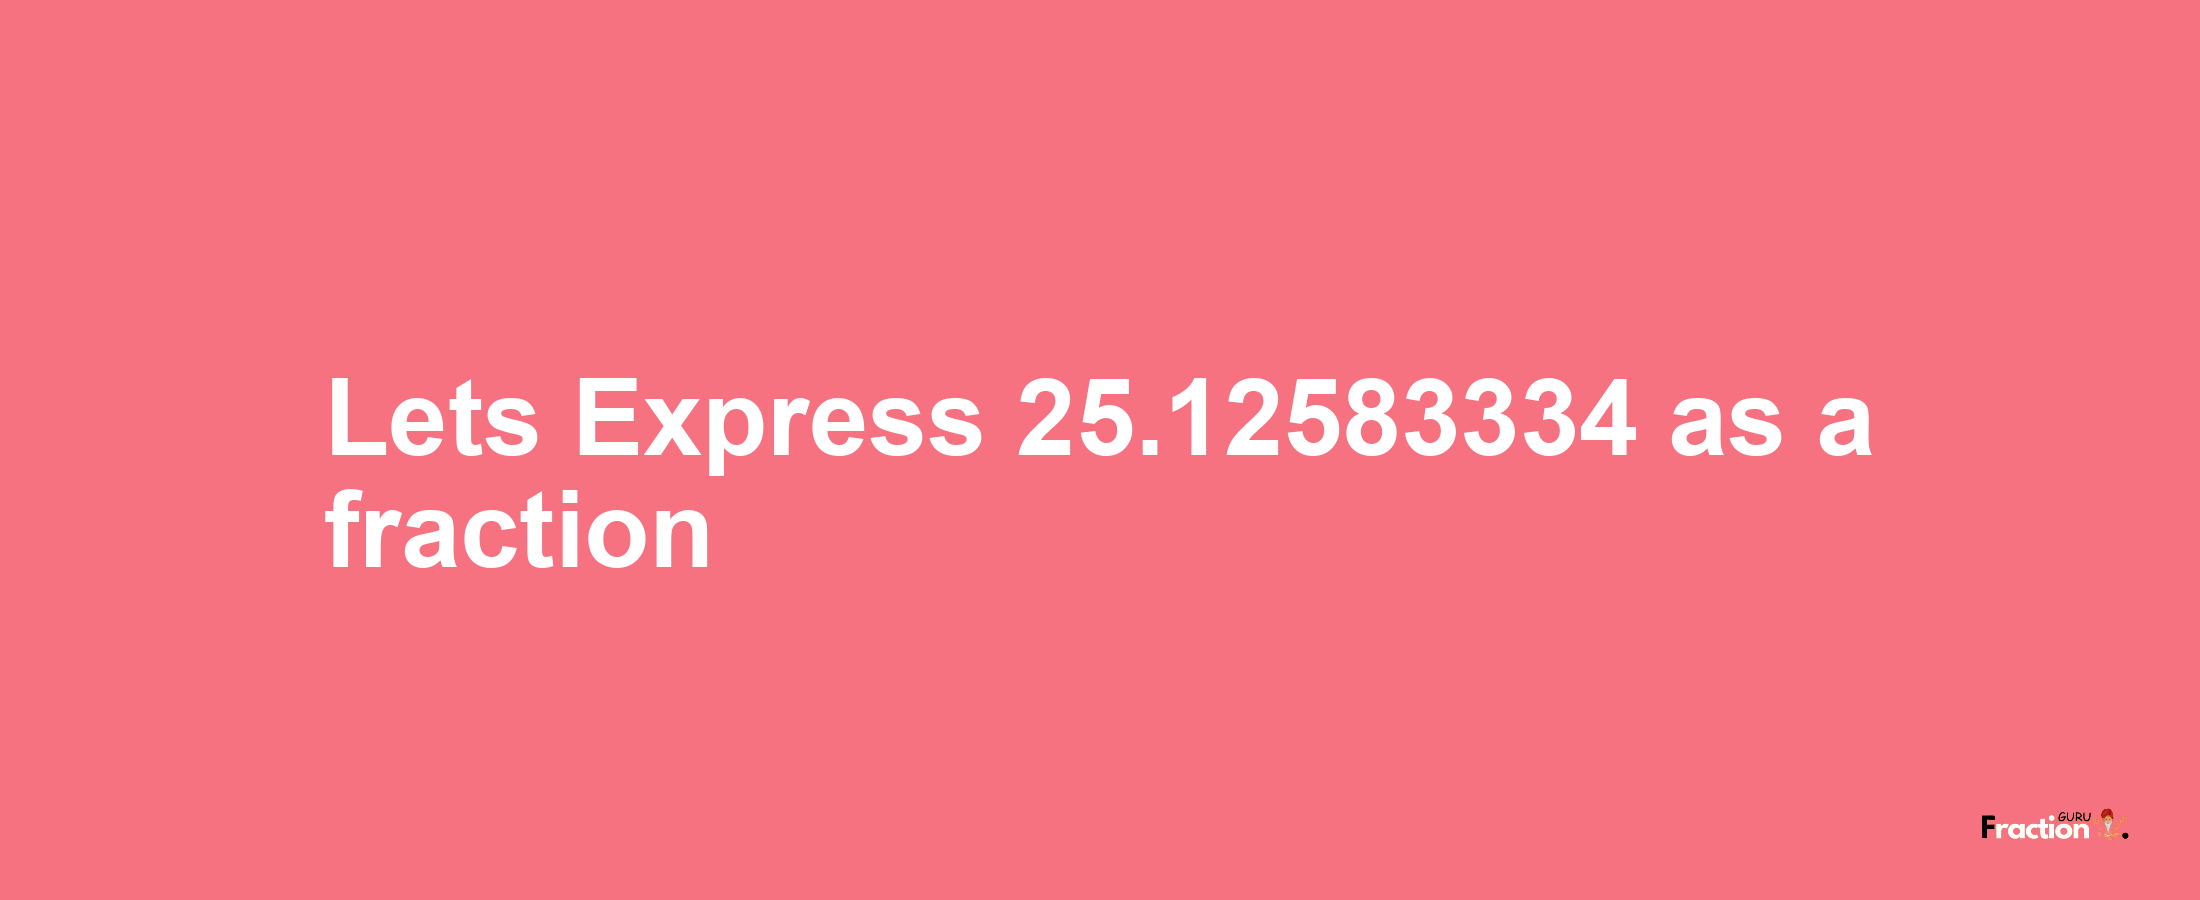 Lets Express 25.12583334 as afraction